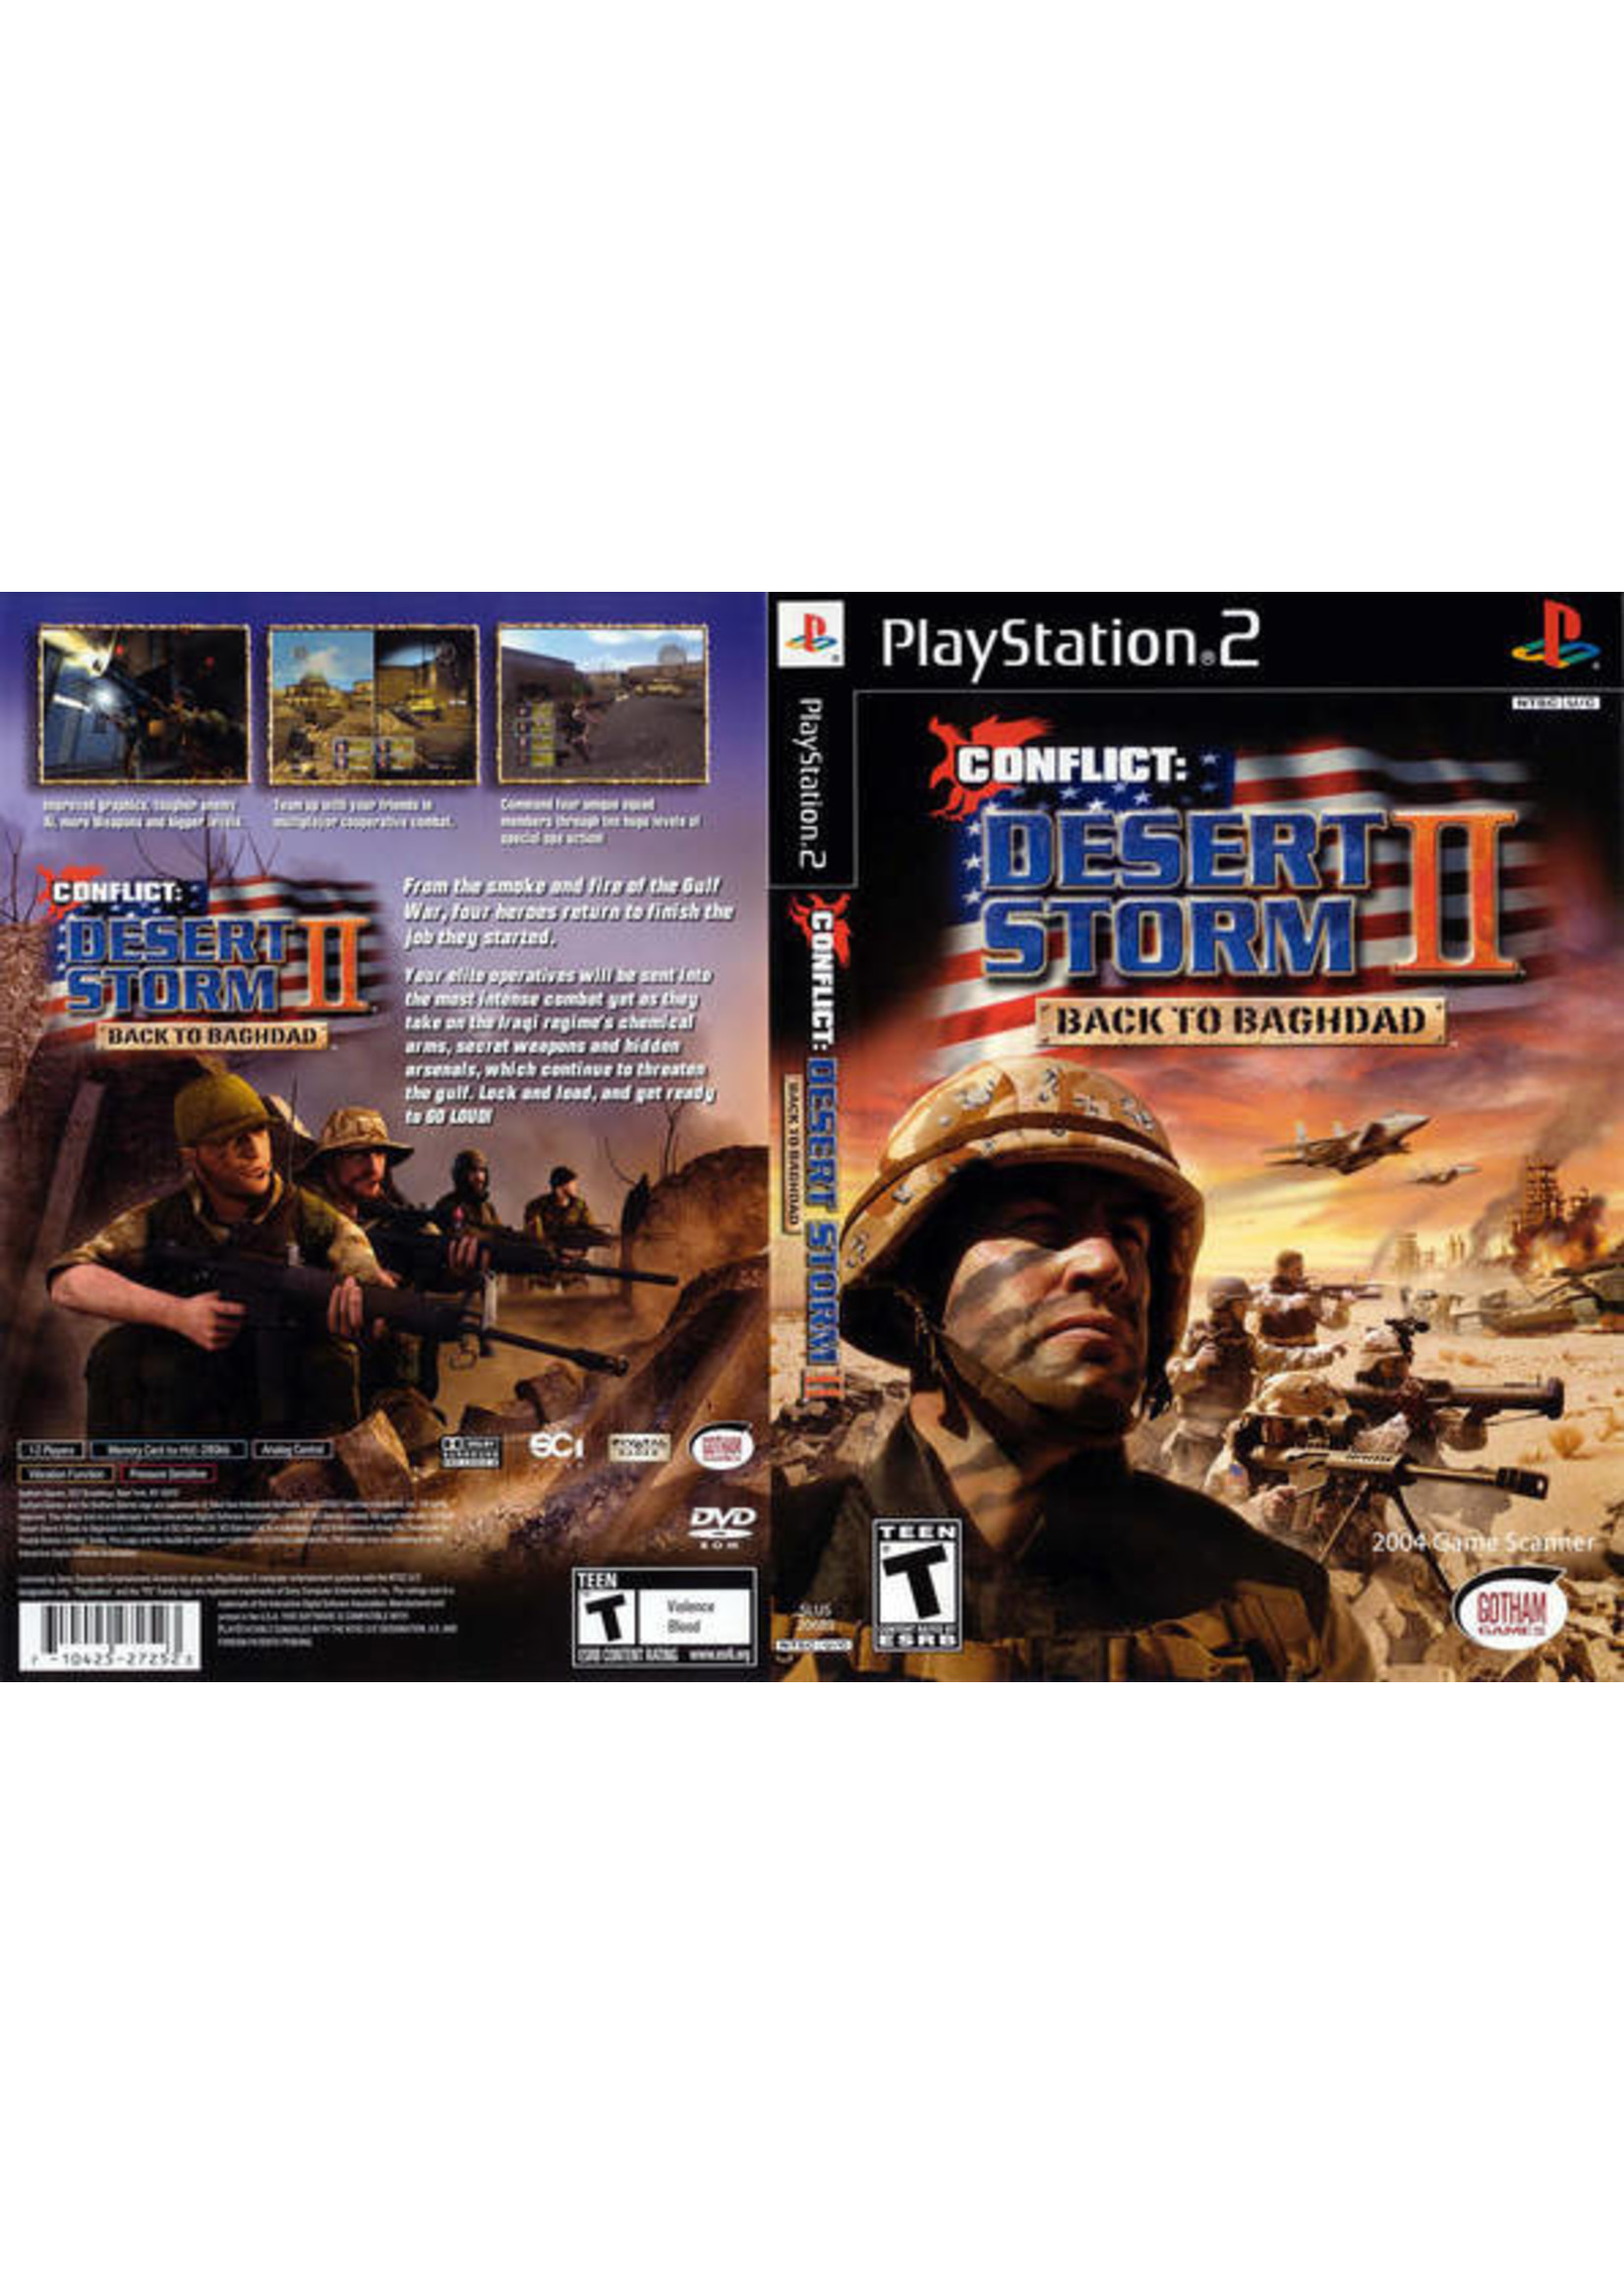 Sony Playstation 2 (PS2) Conflict Desert Storm 2